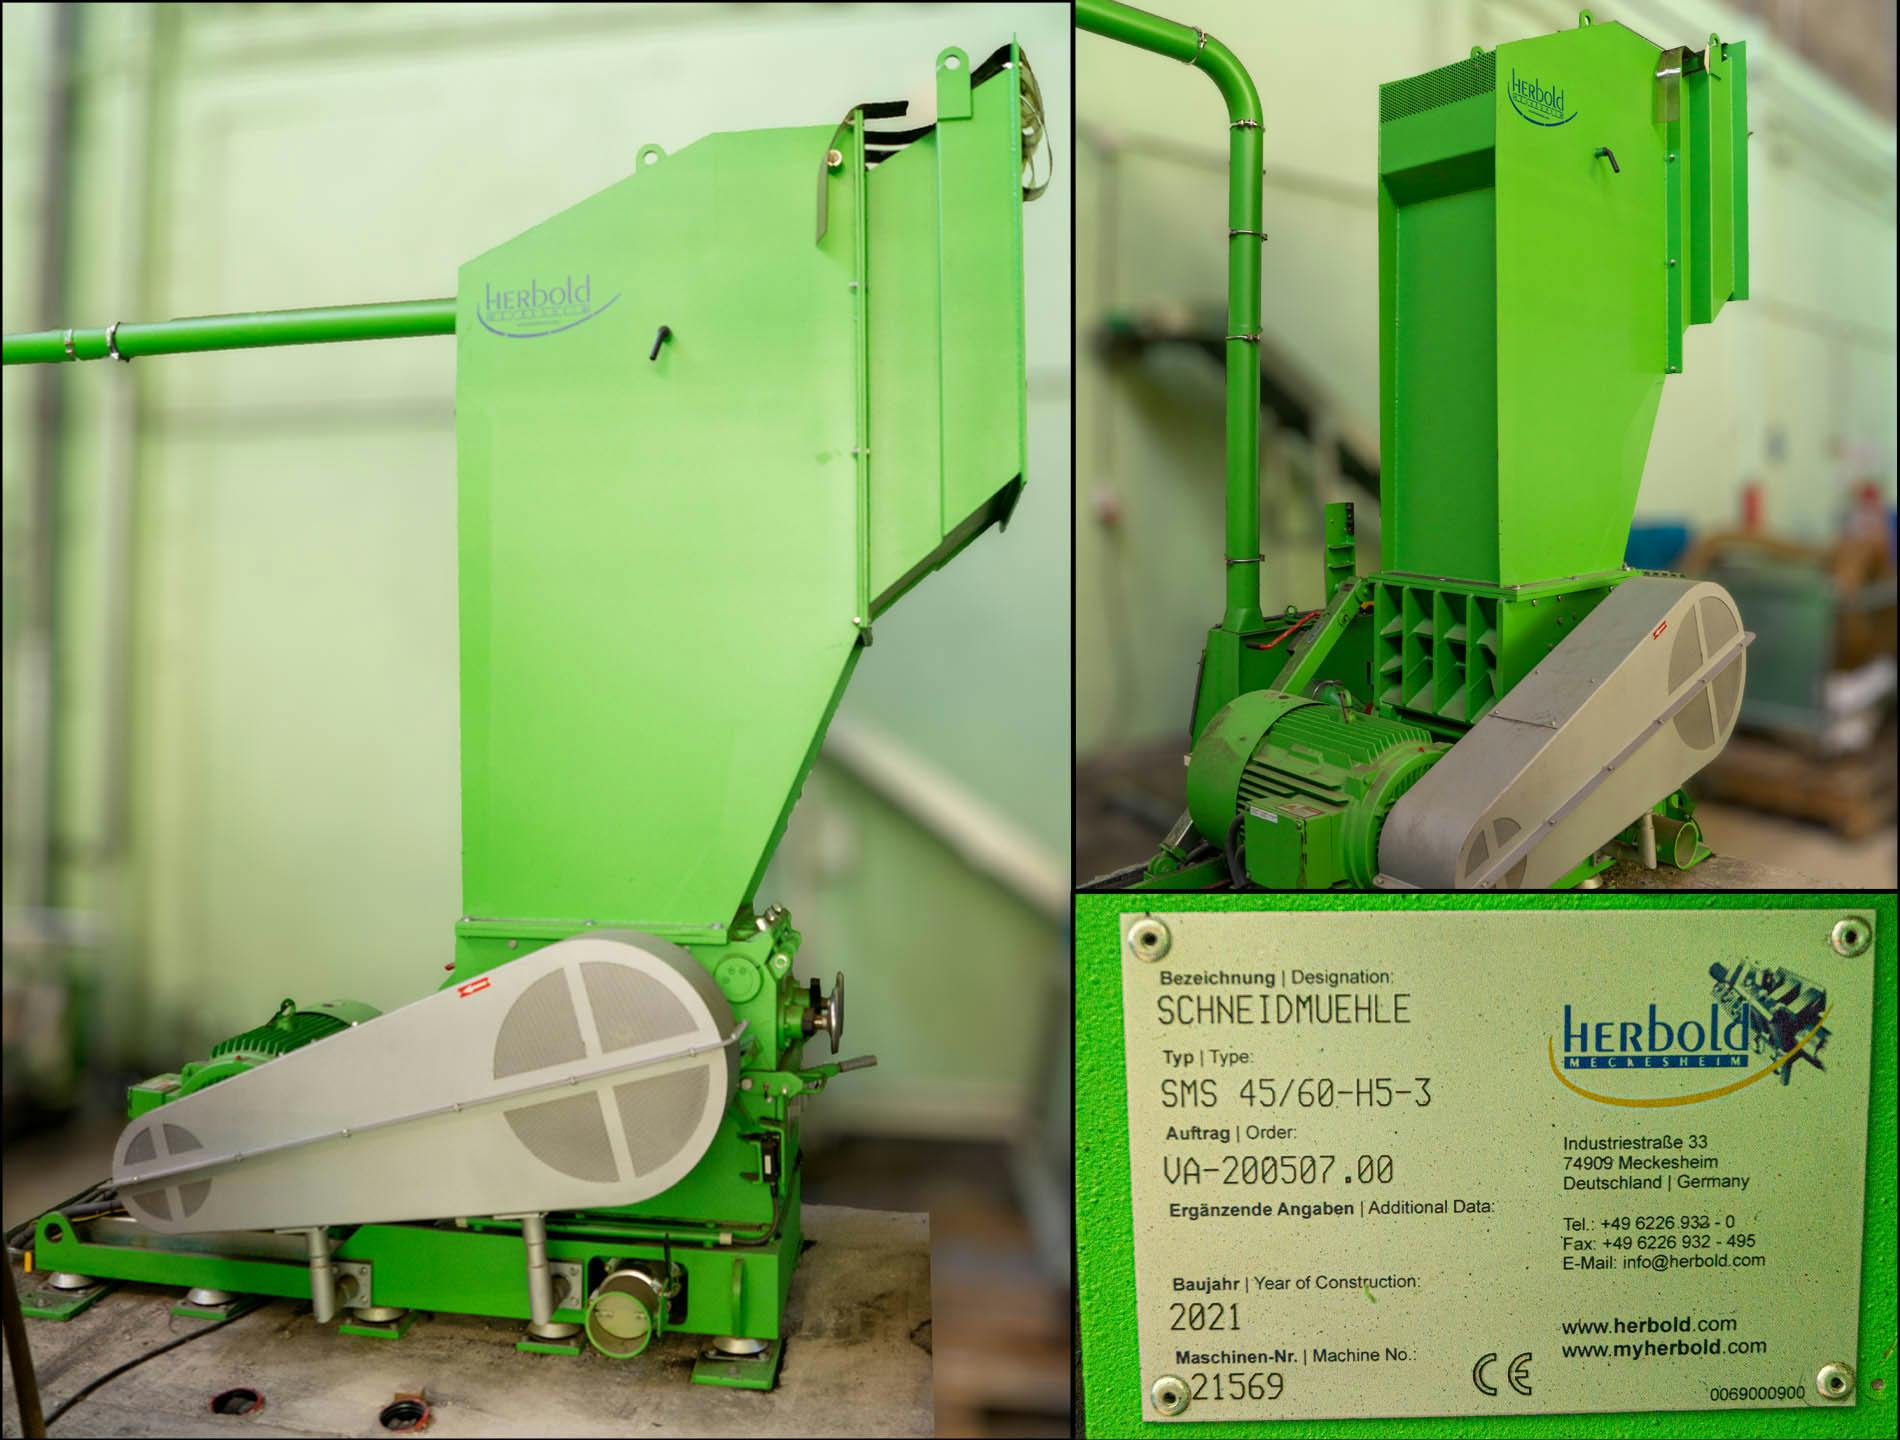 Herbold Complete milling line for plastic - Feinprallmühle - image 2